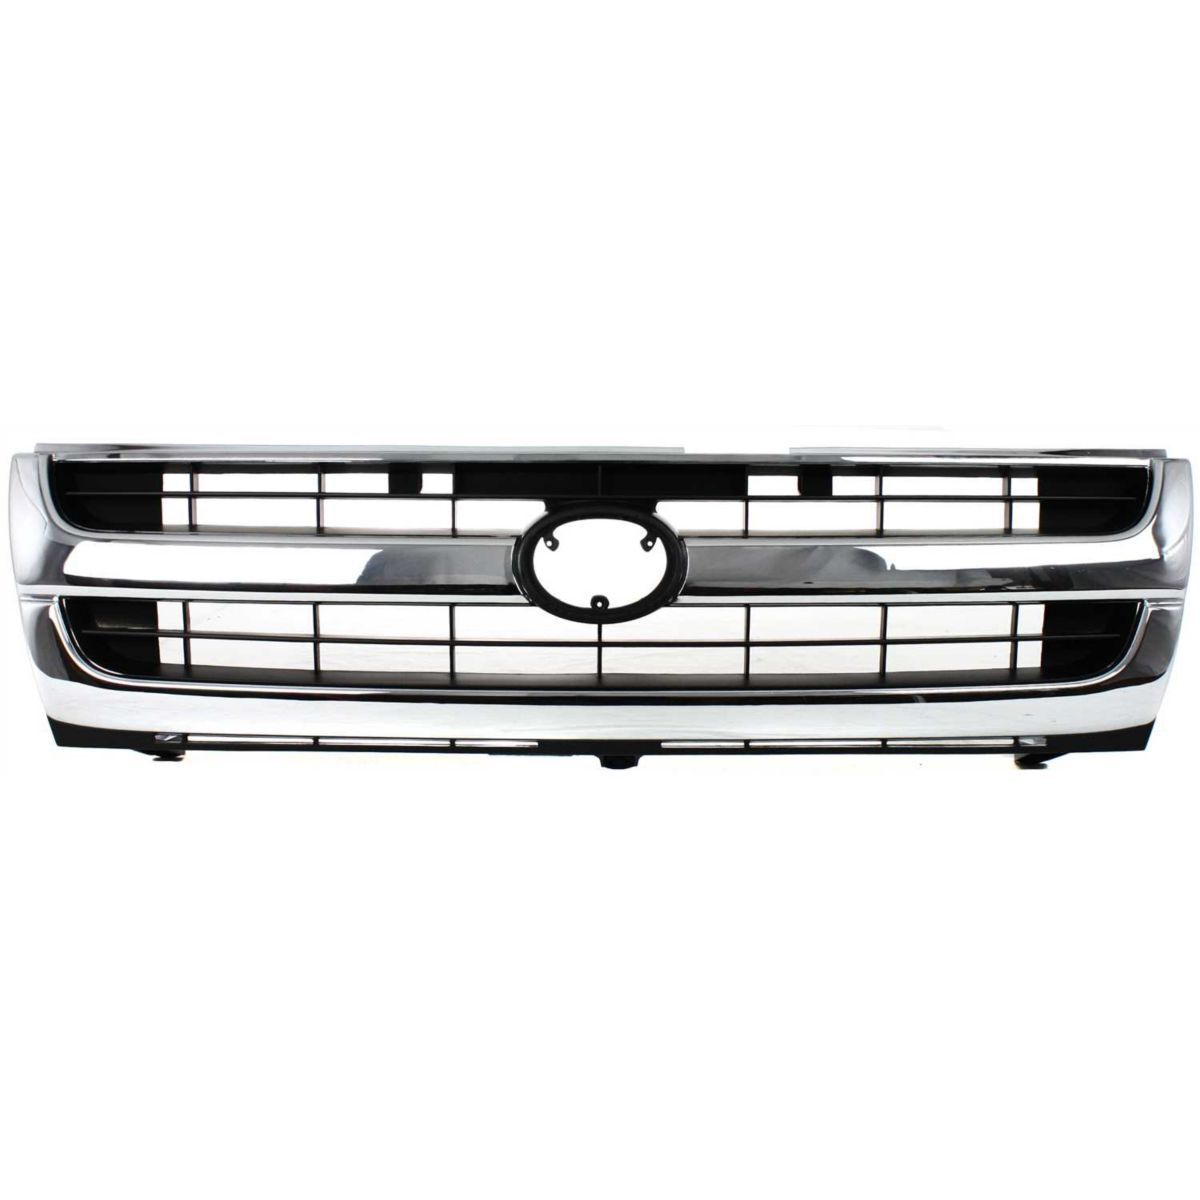 New Chrome Grille For 1997-2000 Toyota Tacoma 2WD 310004070 TO1200205